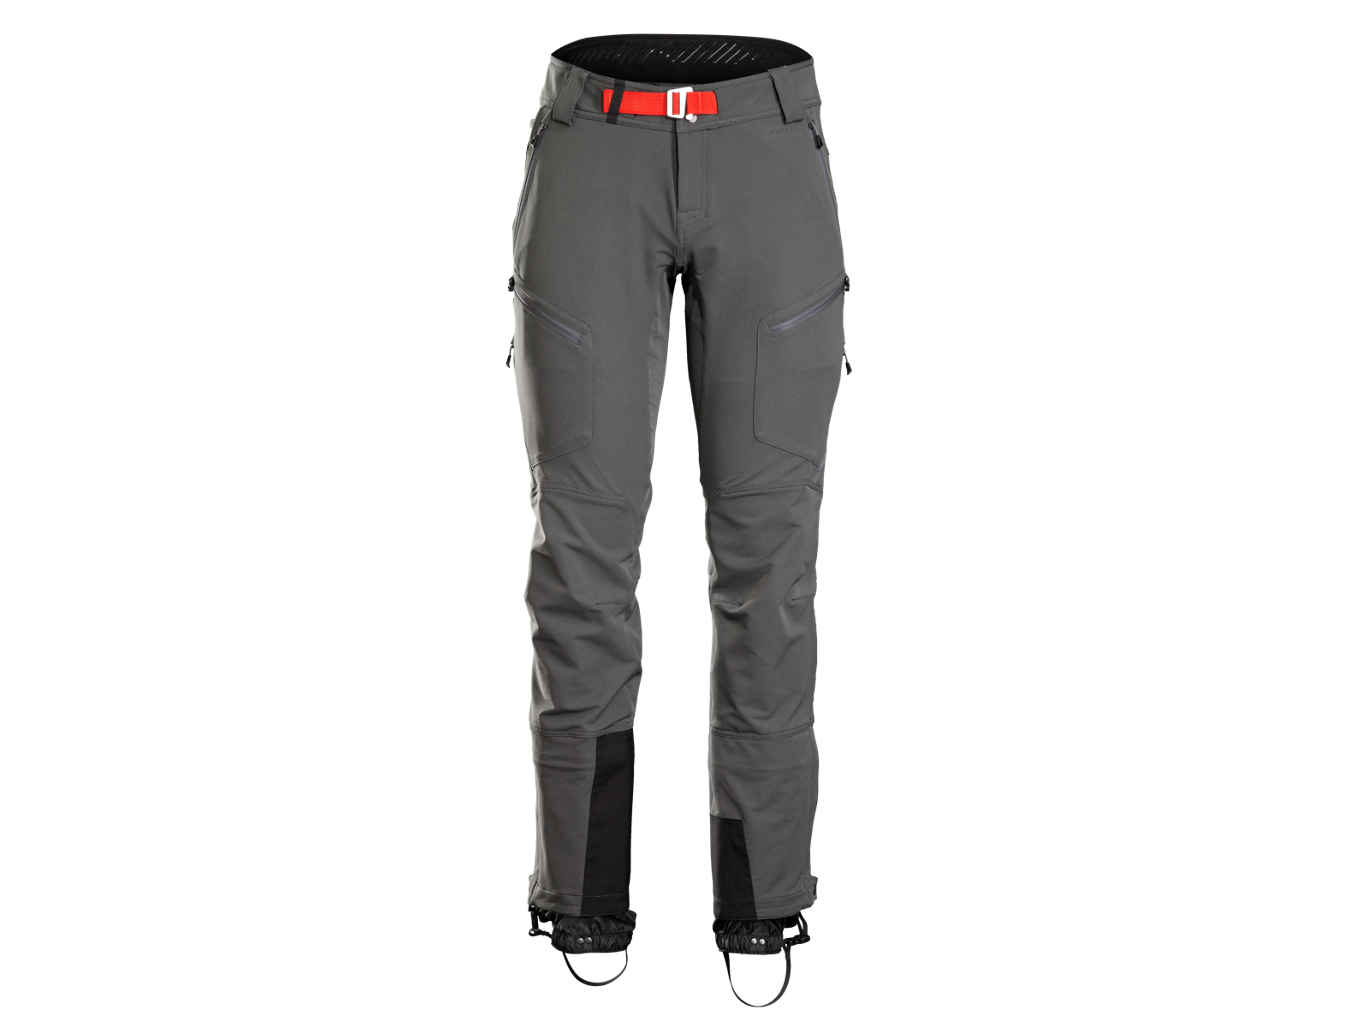 https://www.sefiles.net/images/library/zoom/bontrager-omw-softshell-pant-315649-1.jpg